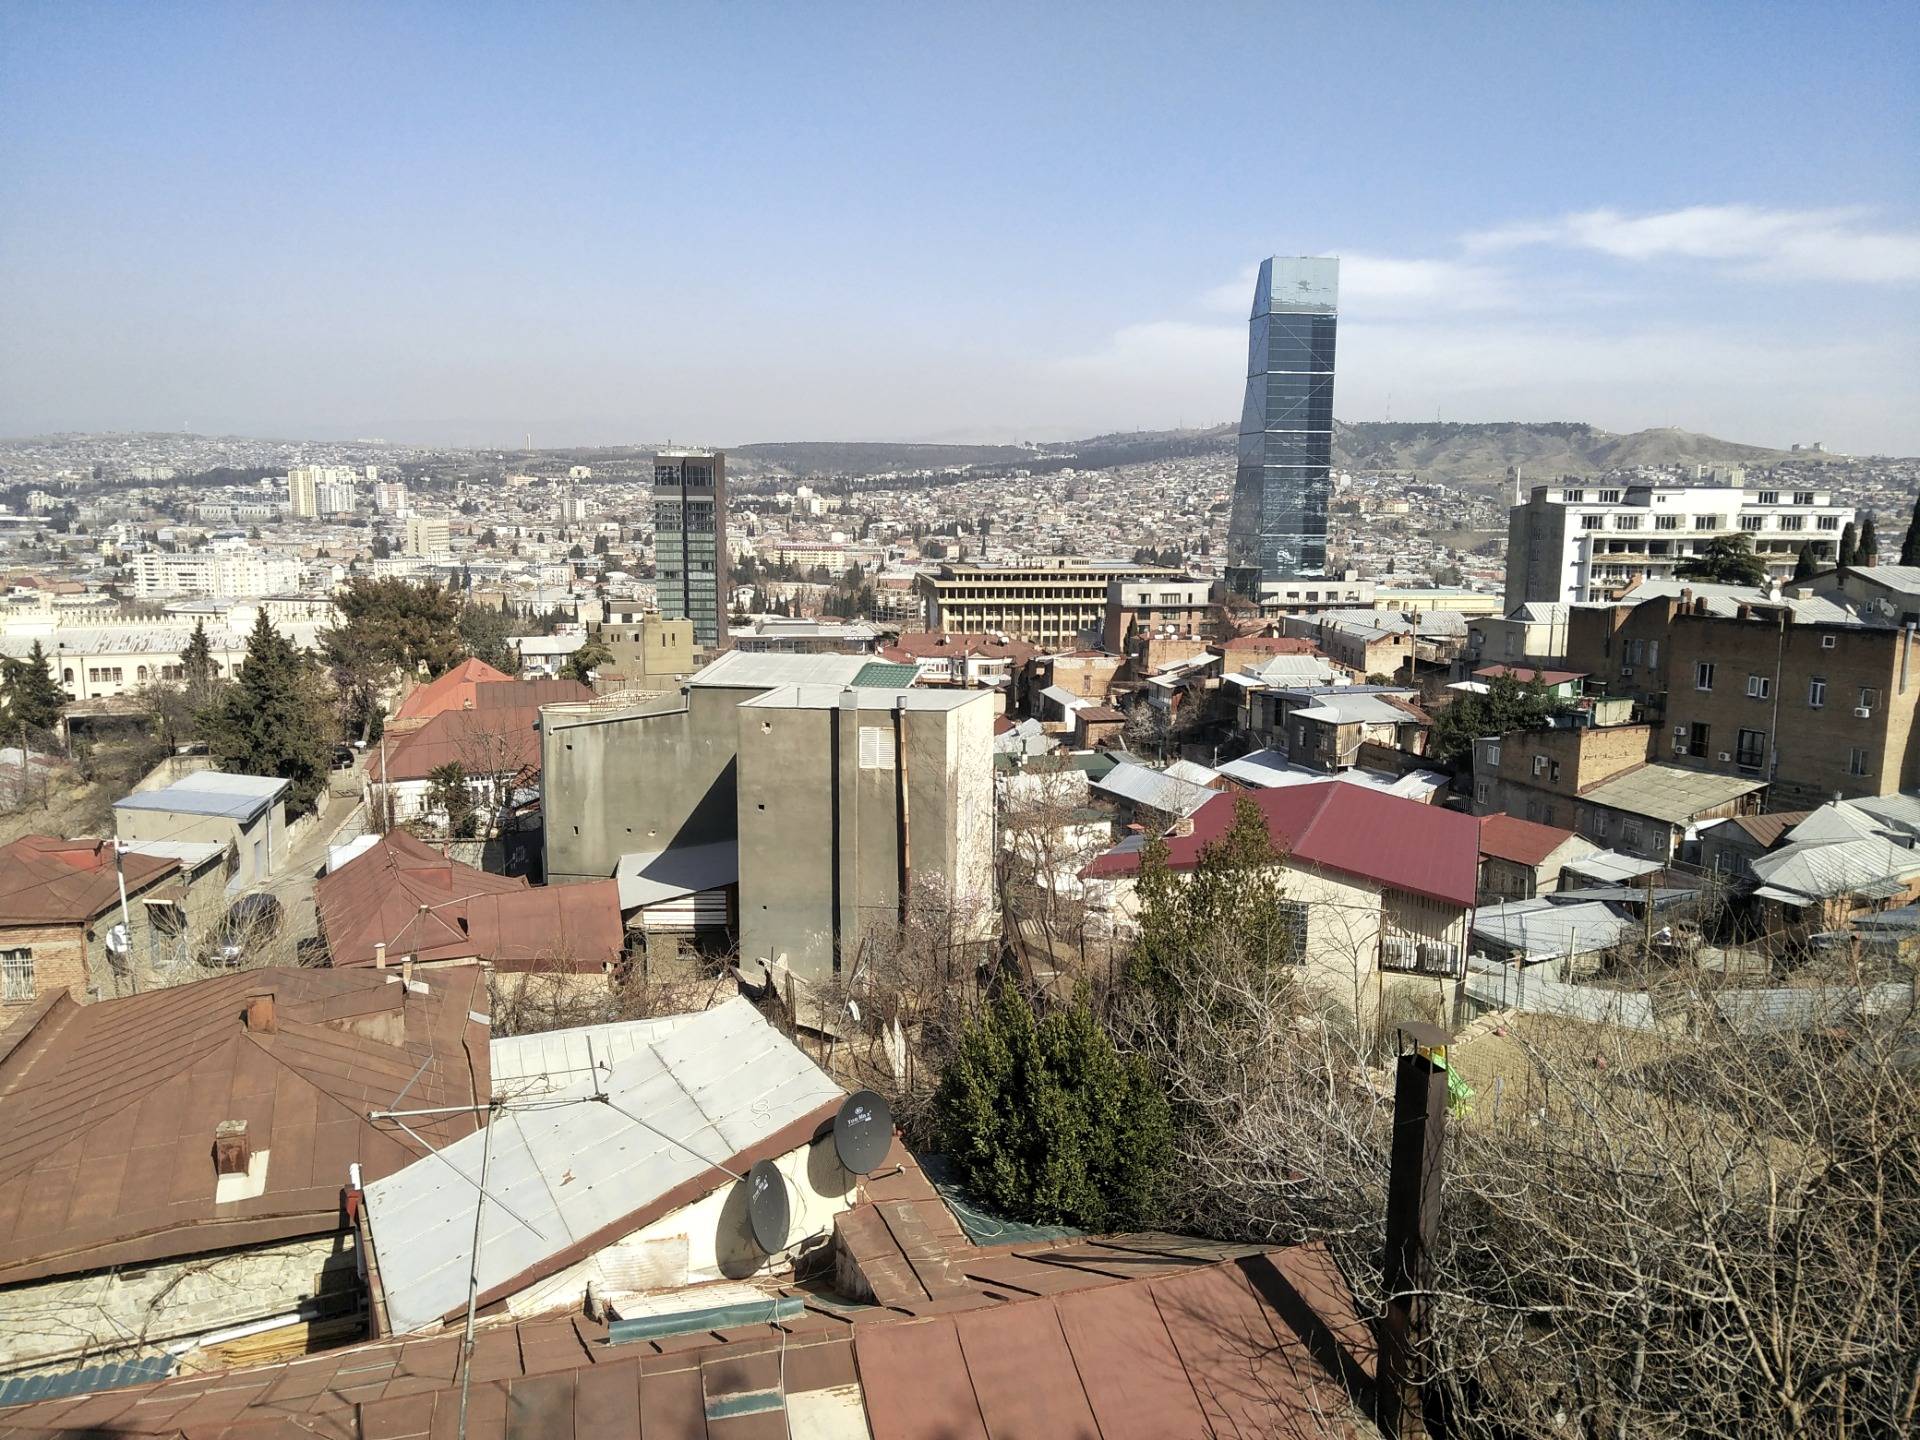 It is easy to get lost in Tbilisi, if that happens just go uphill to see where you are.